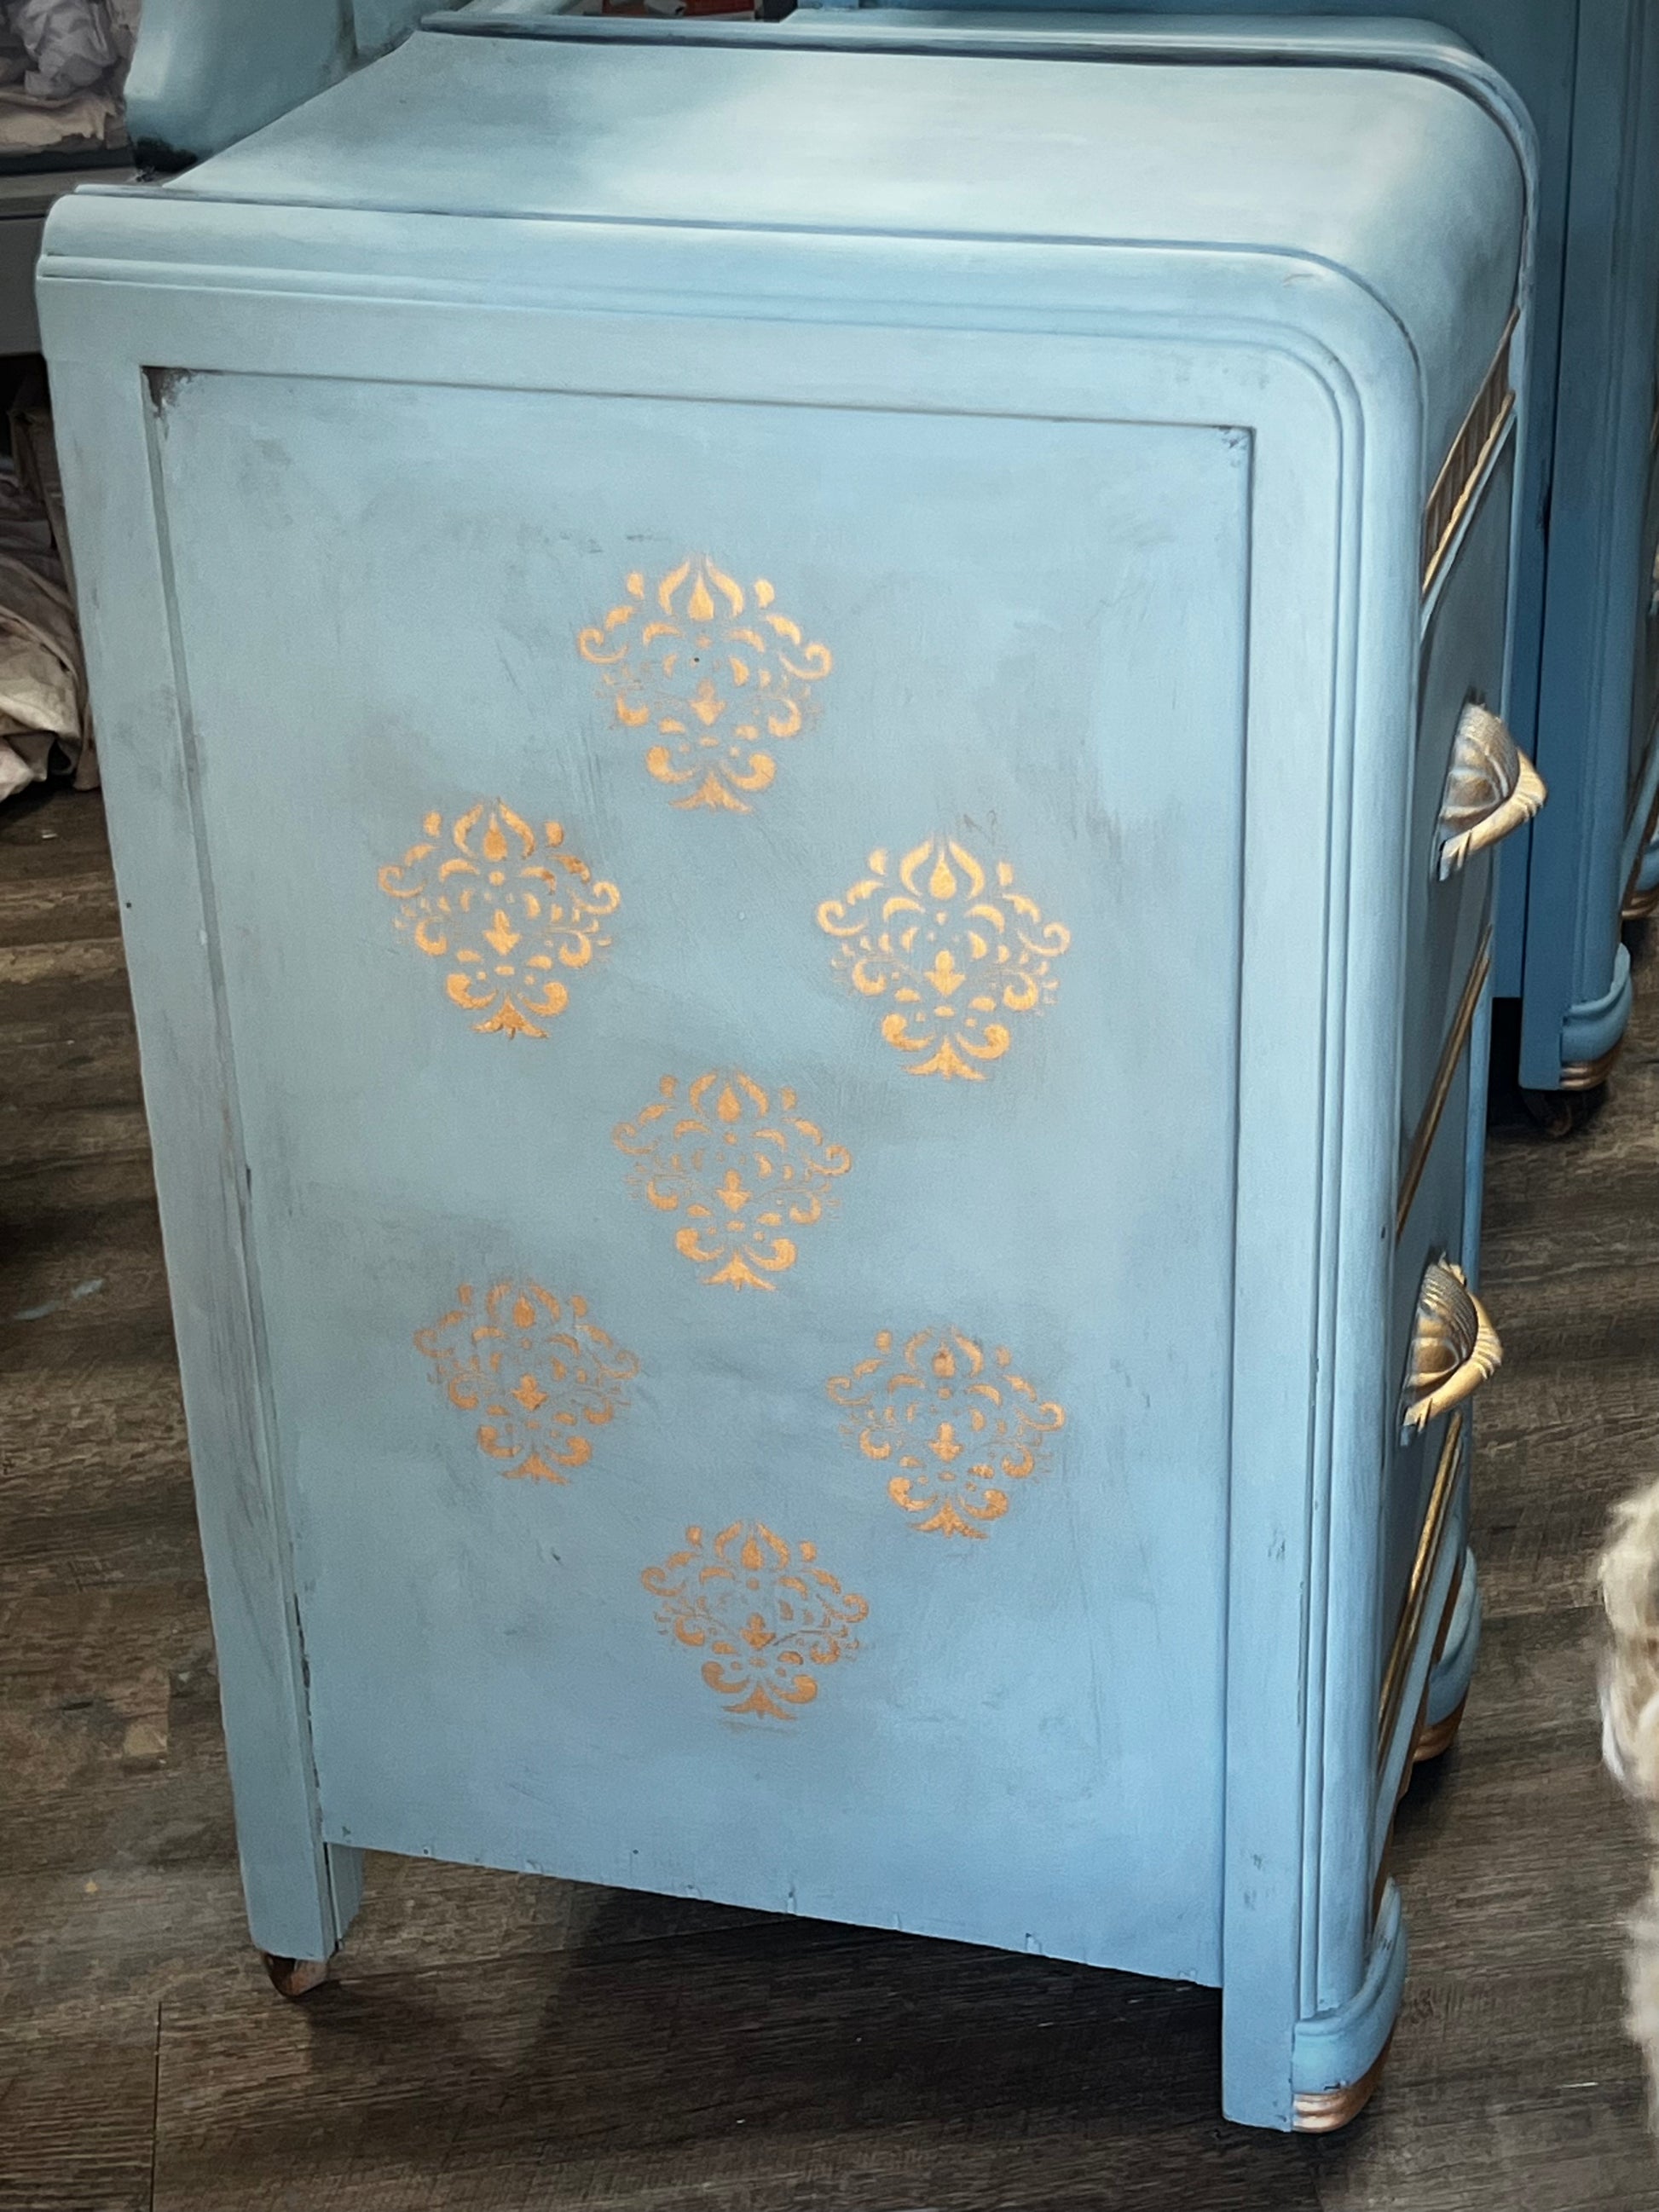 Stunning hand painted vanity dresser redone with Annie Sloan Louis Blue, Clear and Black Wax.Stunning hand painted vanity dresser redone with Annie Sloan Louis Blue, Clear and Black Wax.